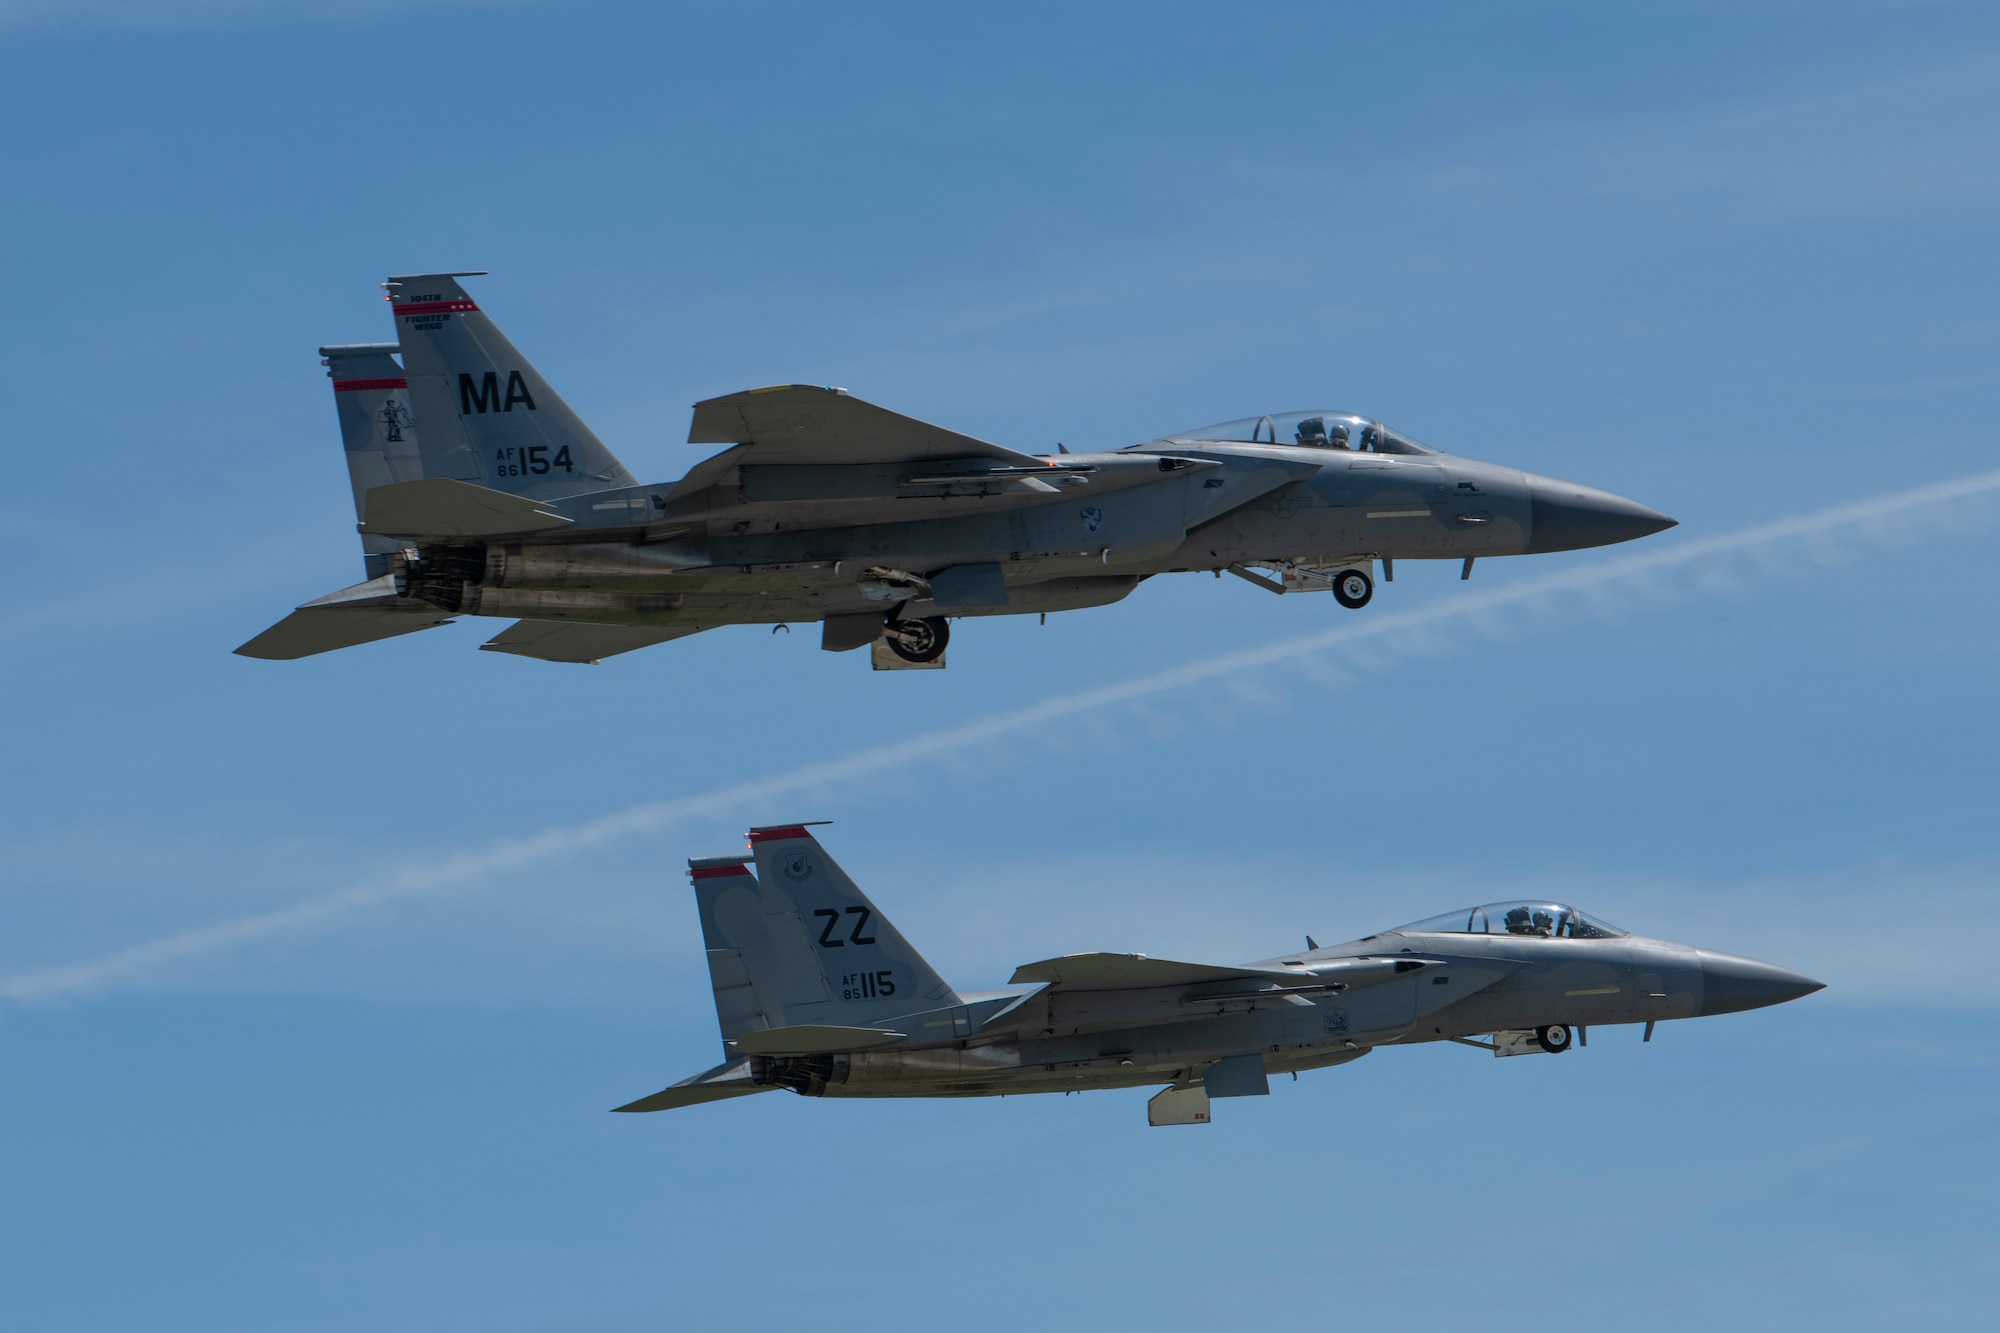 Two U.S. Air Force F-15C Eagles, with the 104th Fighter Wing, Massachusetts Air National Guard, perform a fly-by pass aerial demonstration during the 2023 Westfield International Air Show at Barnes Air National Guard Base, Massachusetts, May 13, 2023. The two-day event allowed the 104th Fighter Wing and joint-service partners to strengthen their community ties with over 70,000 members of the public by showcasing their capabilities, aircraft and equipment. (U.S. Air National Guard photo by Staff Sgt. Hanna Smith)